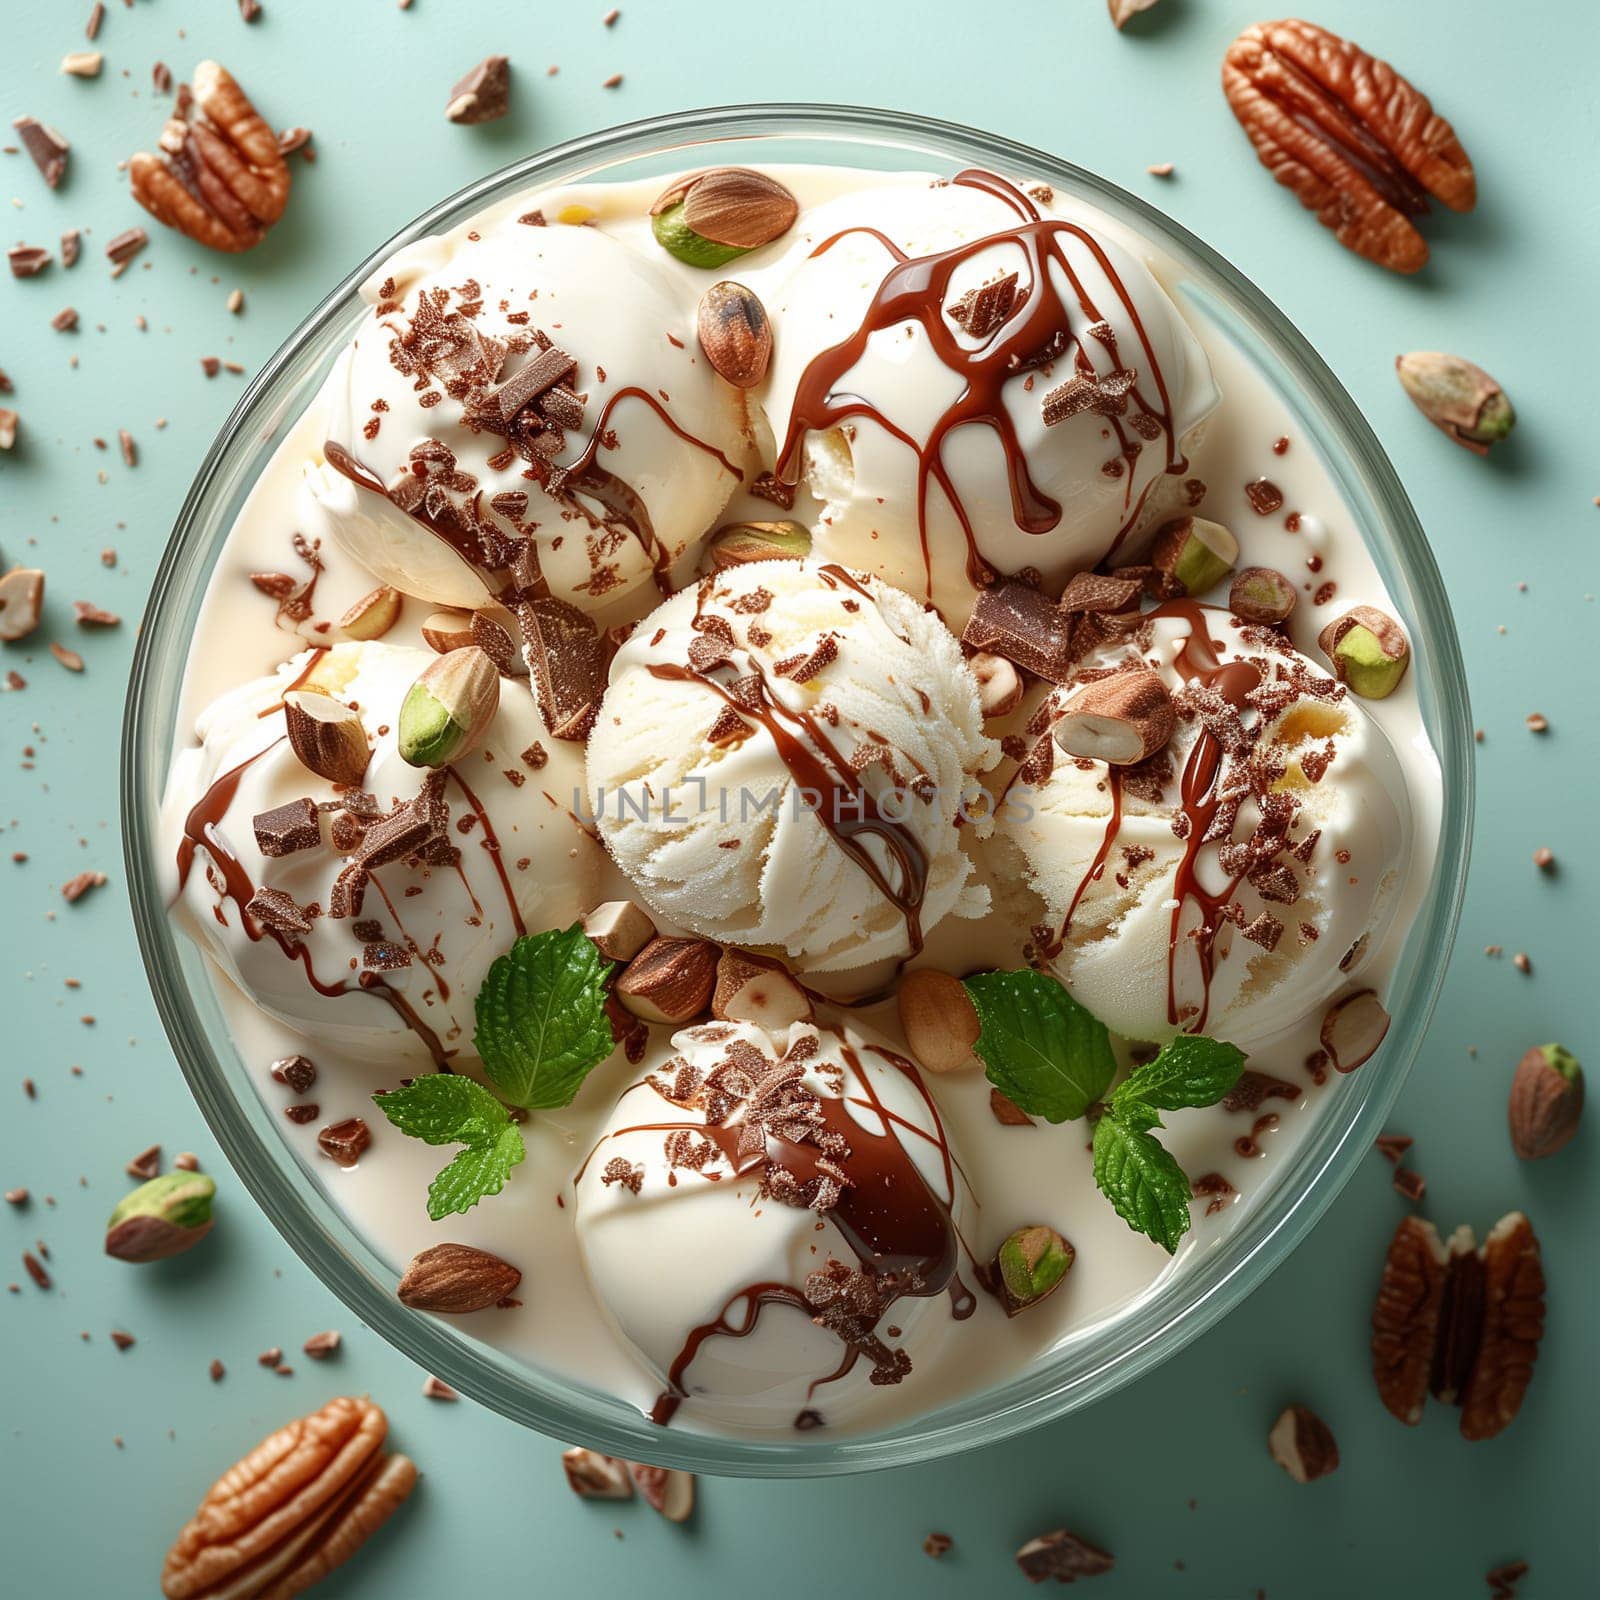 A bowl filled with creamy ice cream topped with crunchy nuts, ready to be enjoyed as a delicious treat.